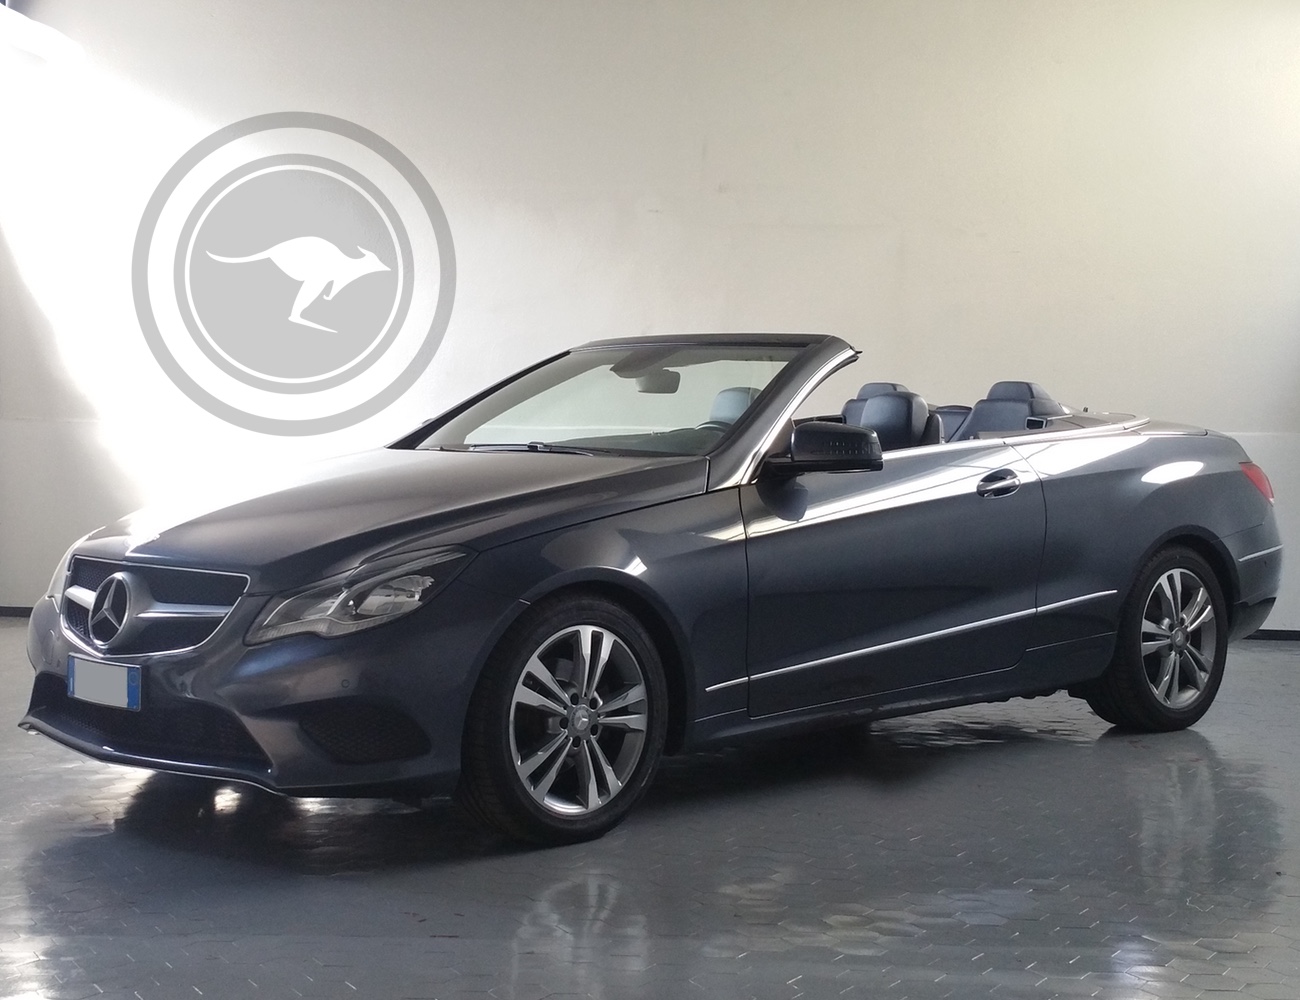 Mercedes-Benz E Class Cabrio Sportline for rent, find out